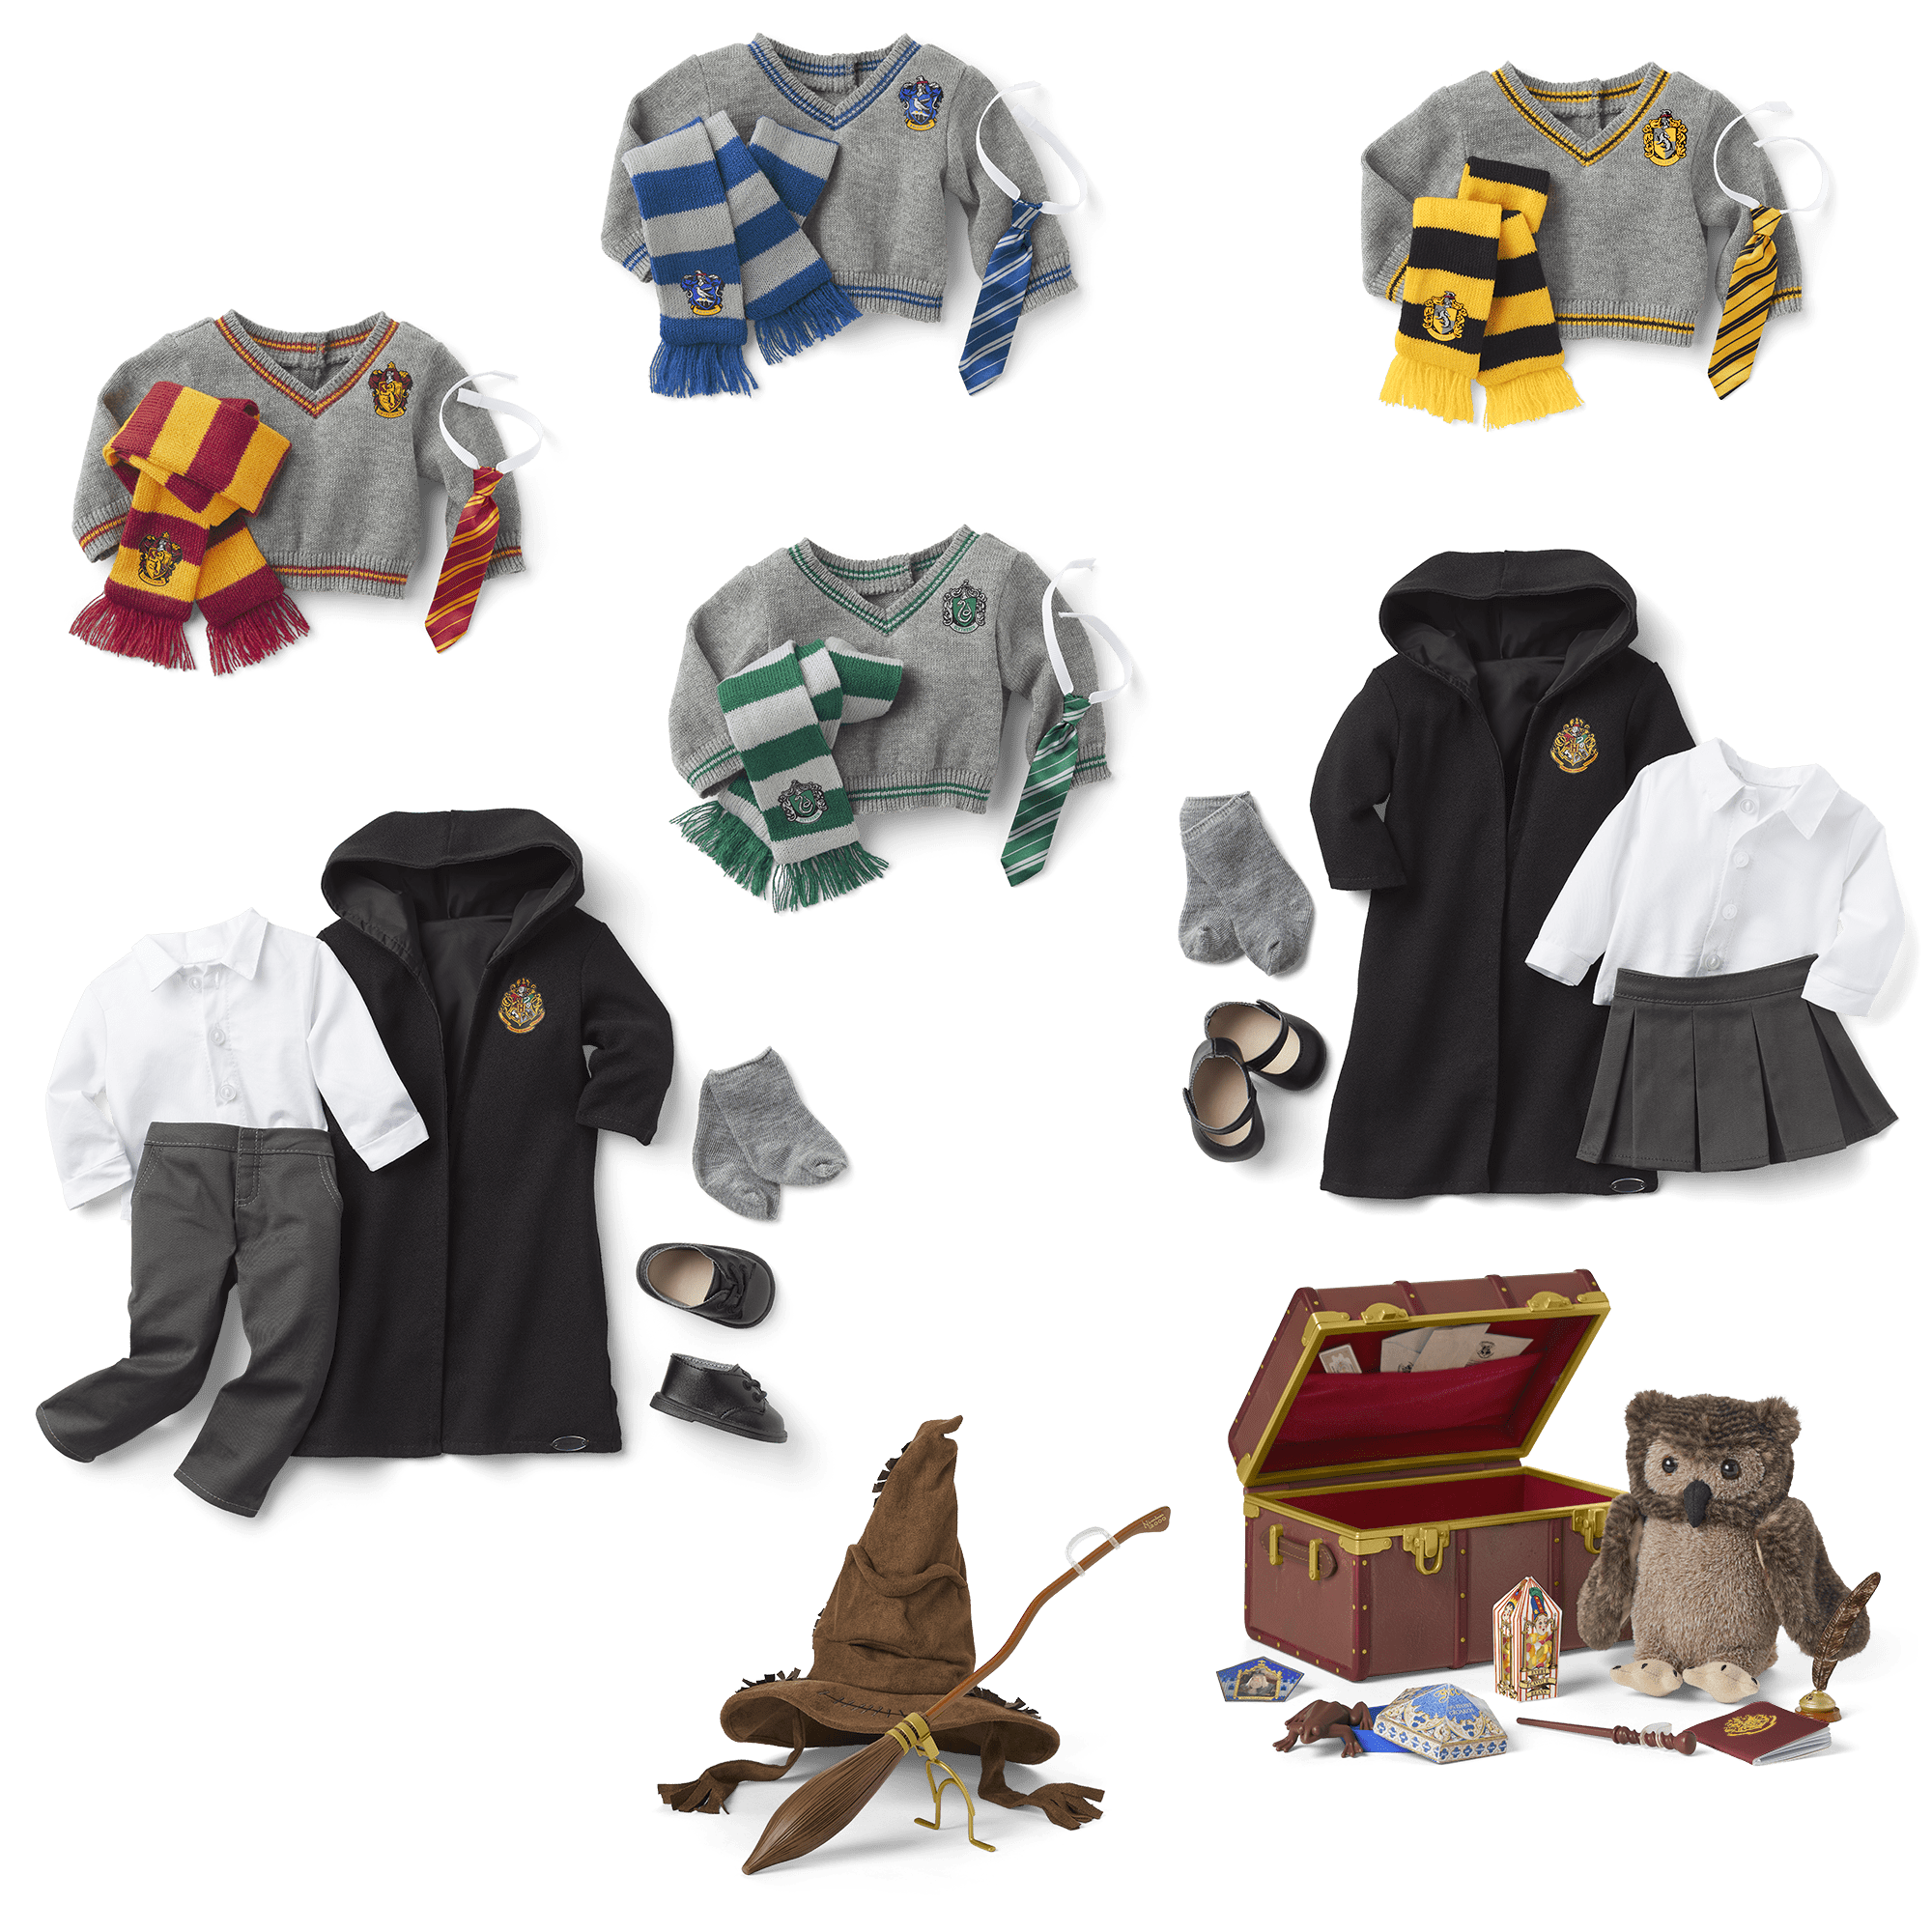 Harry Potter various characters doll with accessories and accessories to  collect 